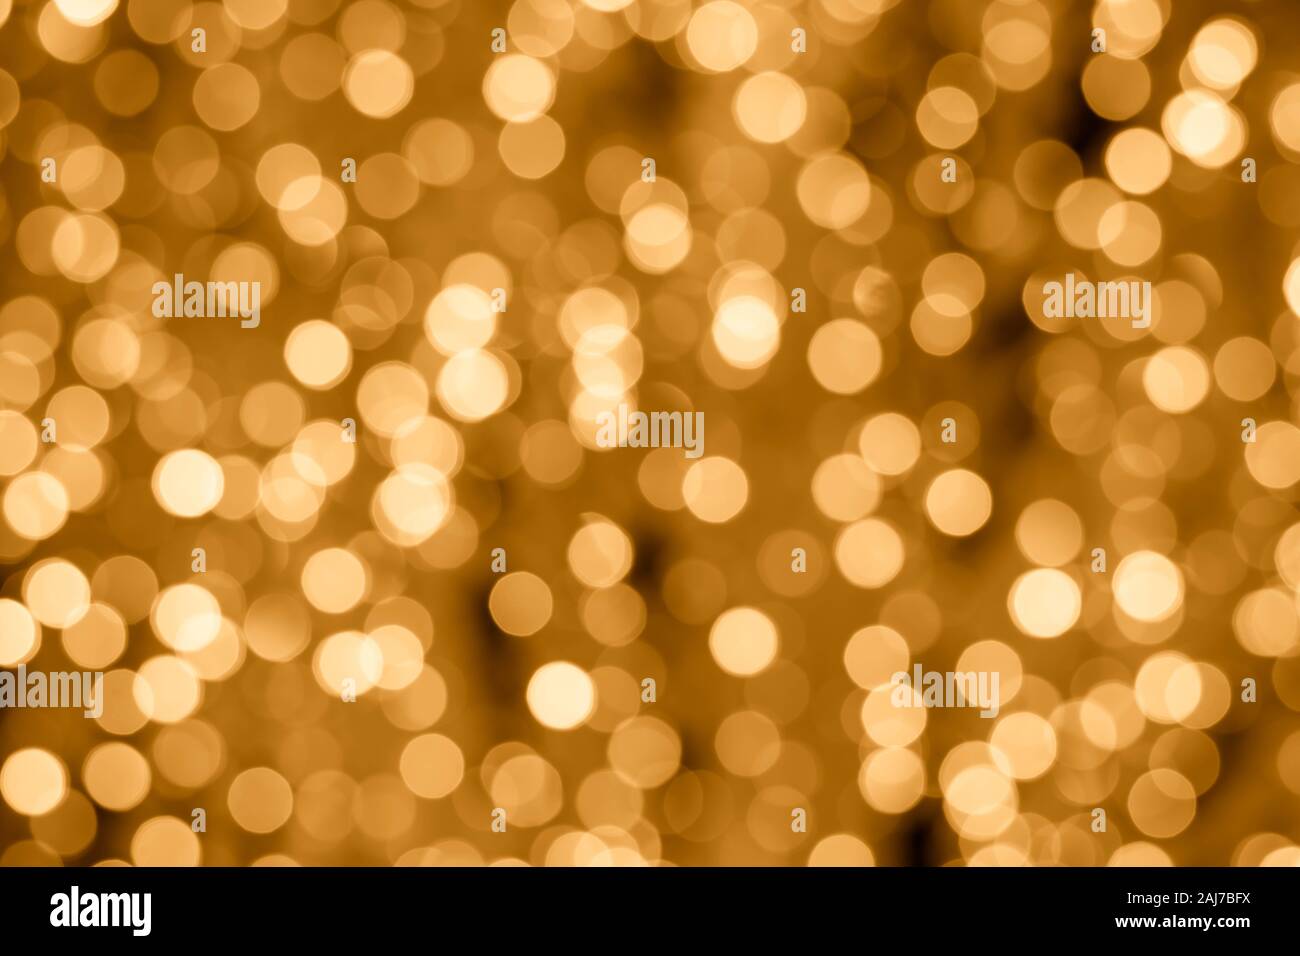 Abstract golden background with lights bokeh. Illuminated backgrounds. Blurry effect, glowing texture, defocused yellow shiny circles Stock Photo